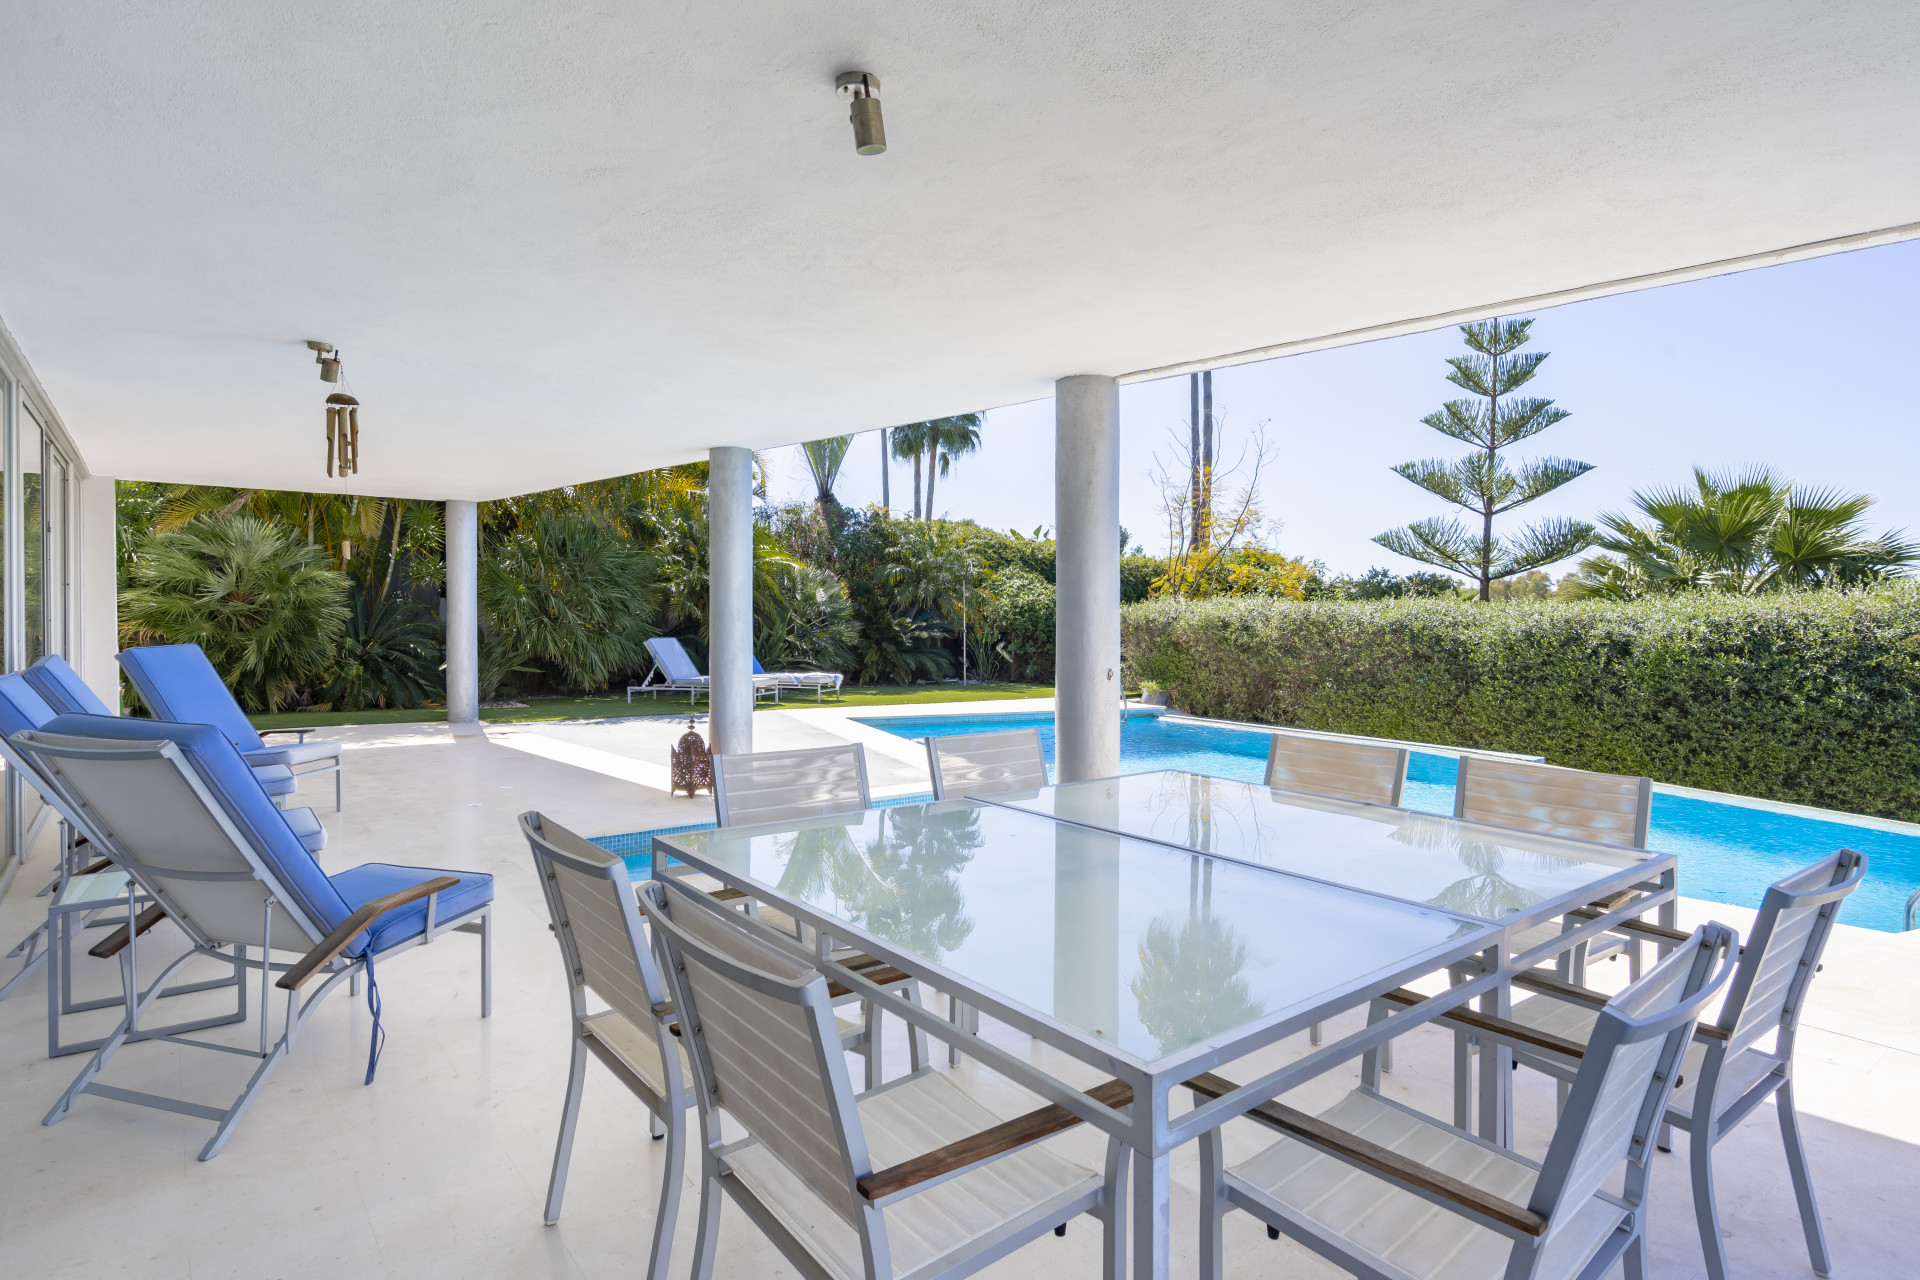 Unique contemporary villa in the well-known area of Paraiso Medio superbly built on a 1.025m2 plot